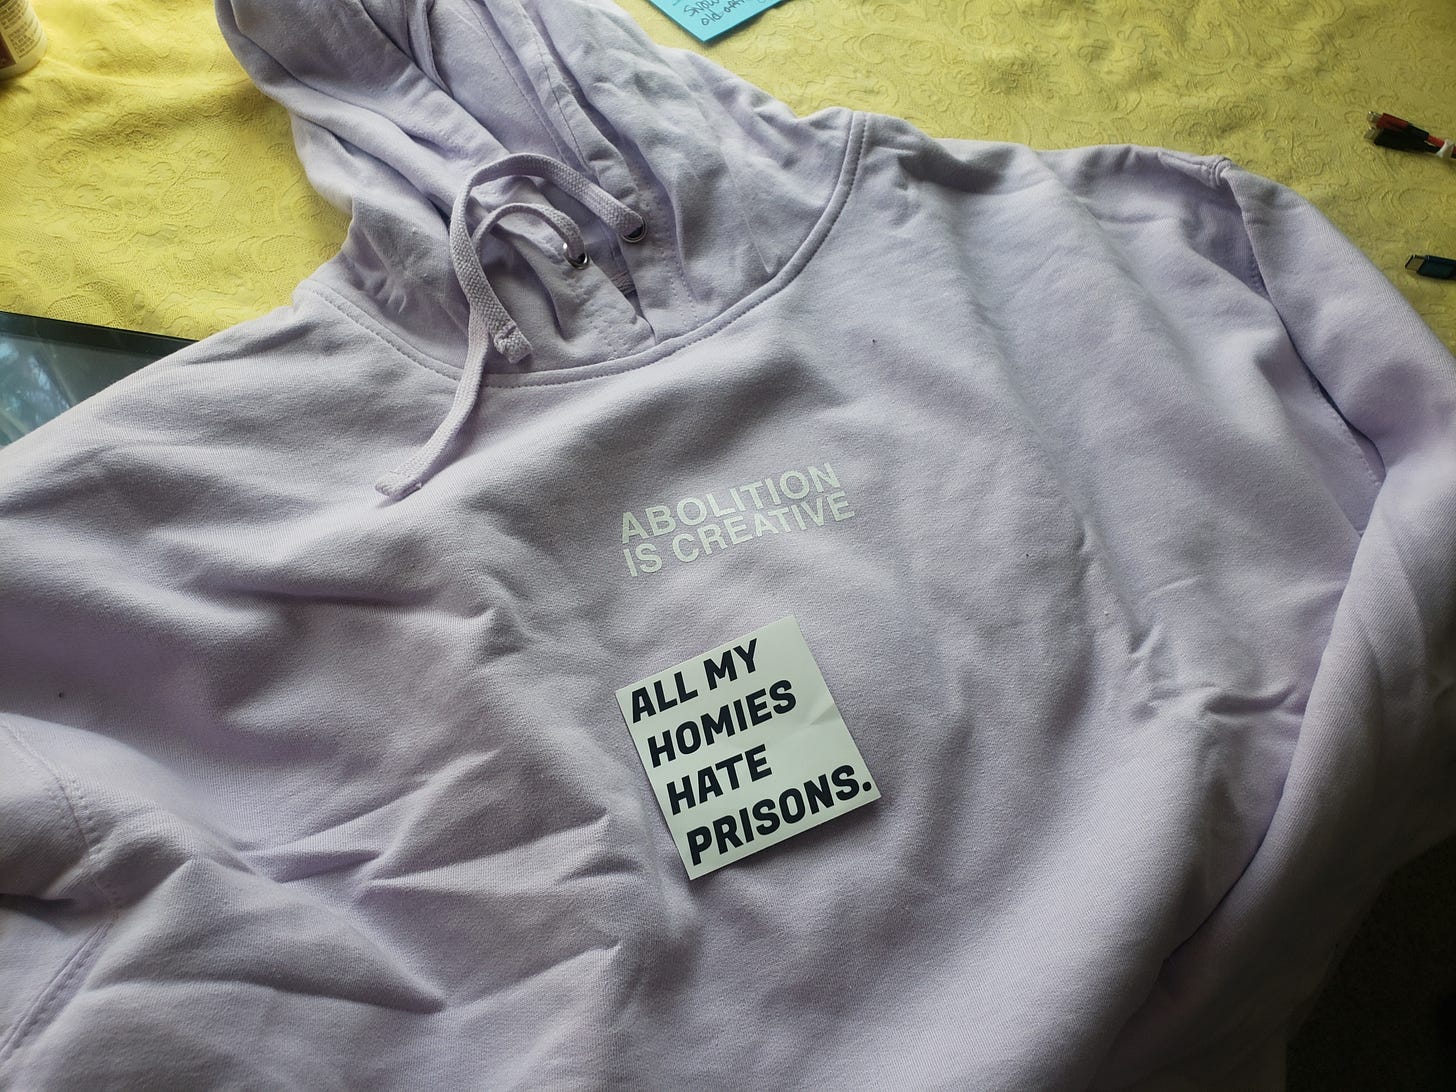 lavendar hoodie with the text "Abolition is creative"